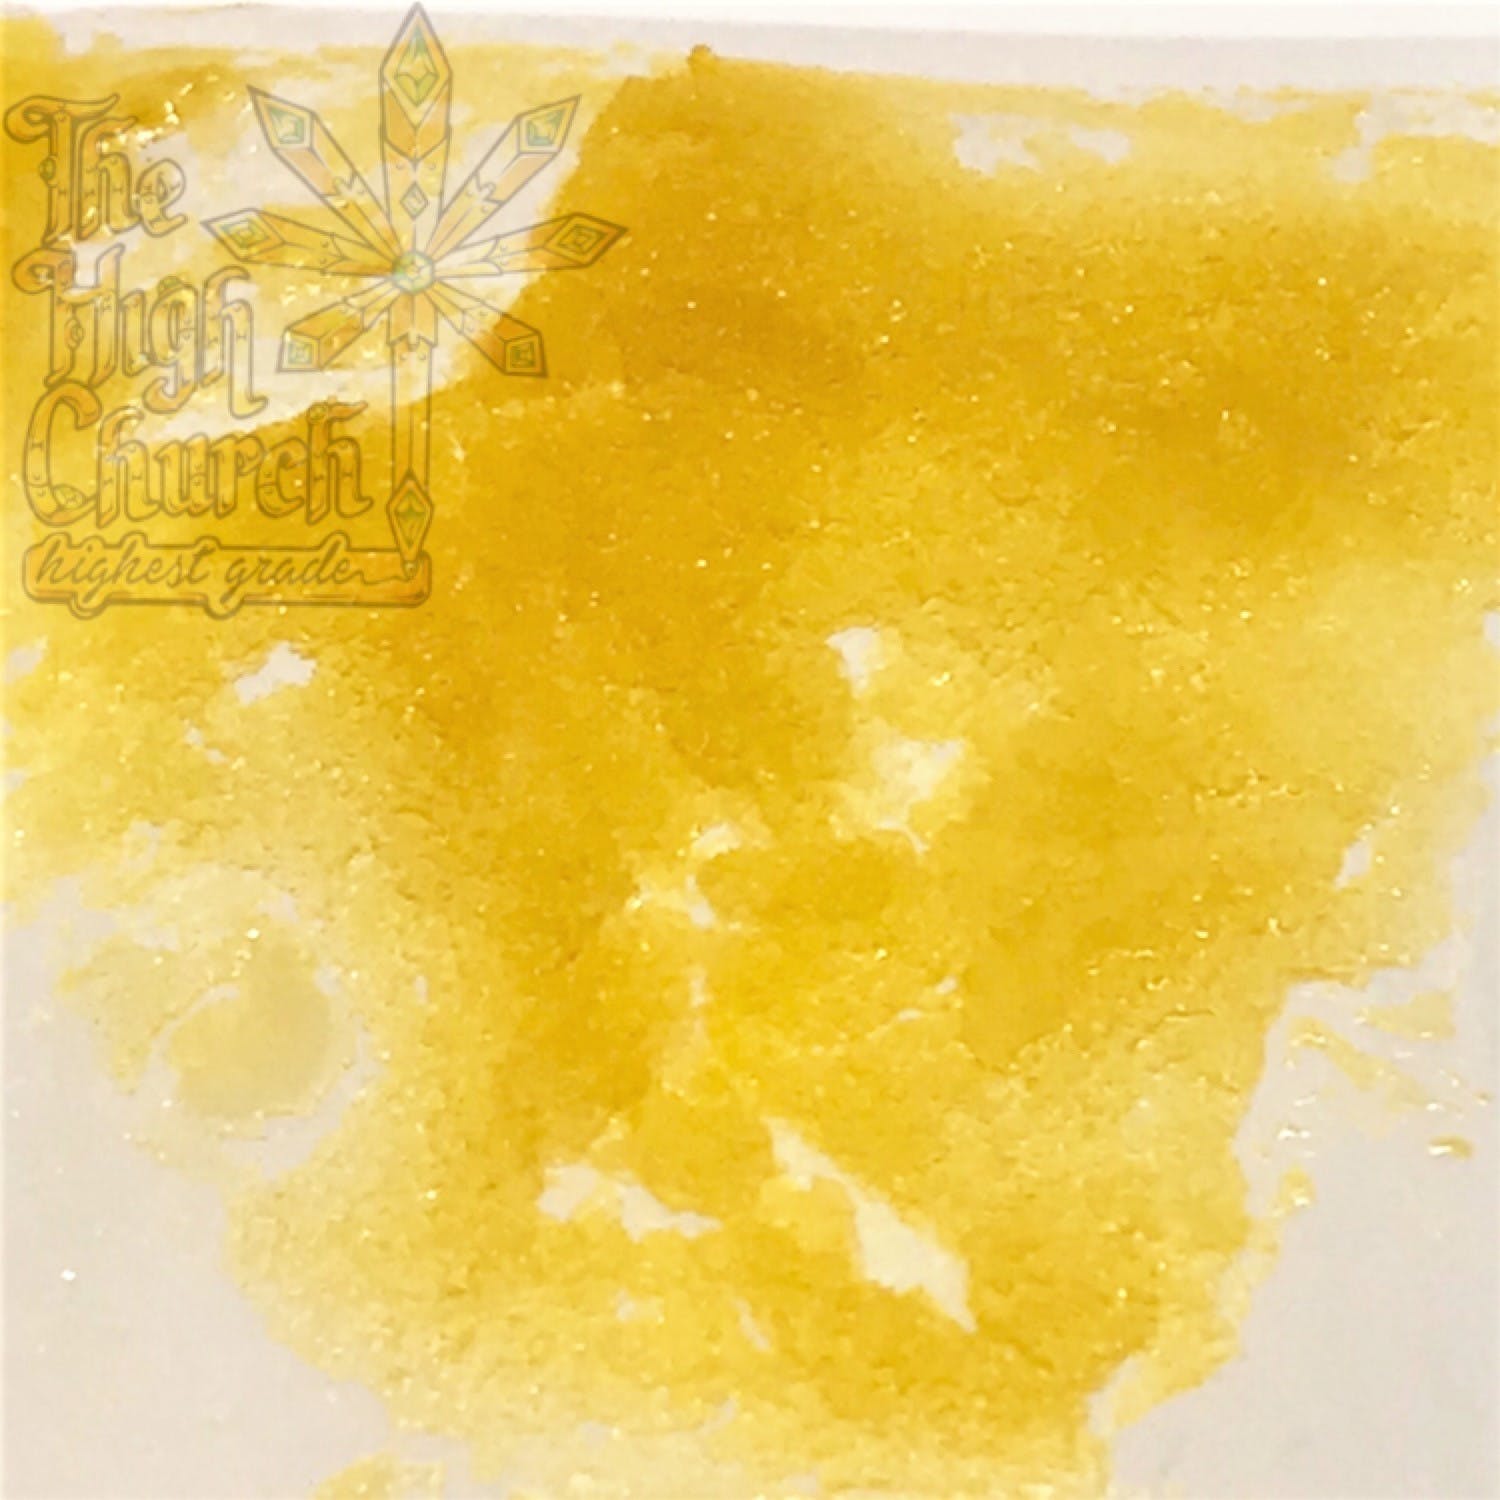 concentrate-shaman-extracts-strawberry-banana-nug-run-shatter